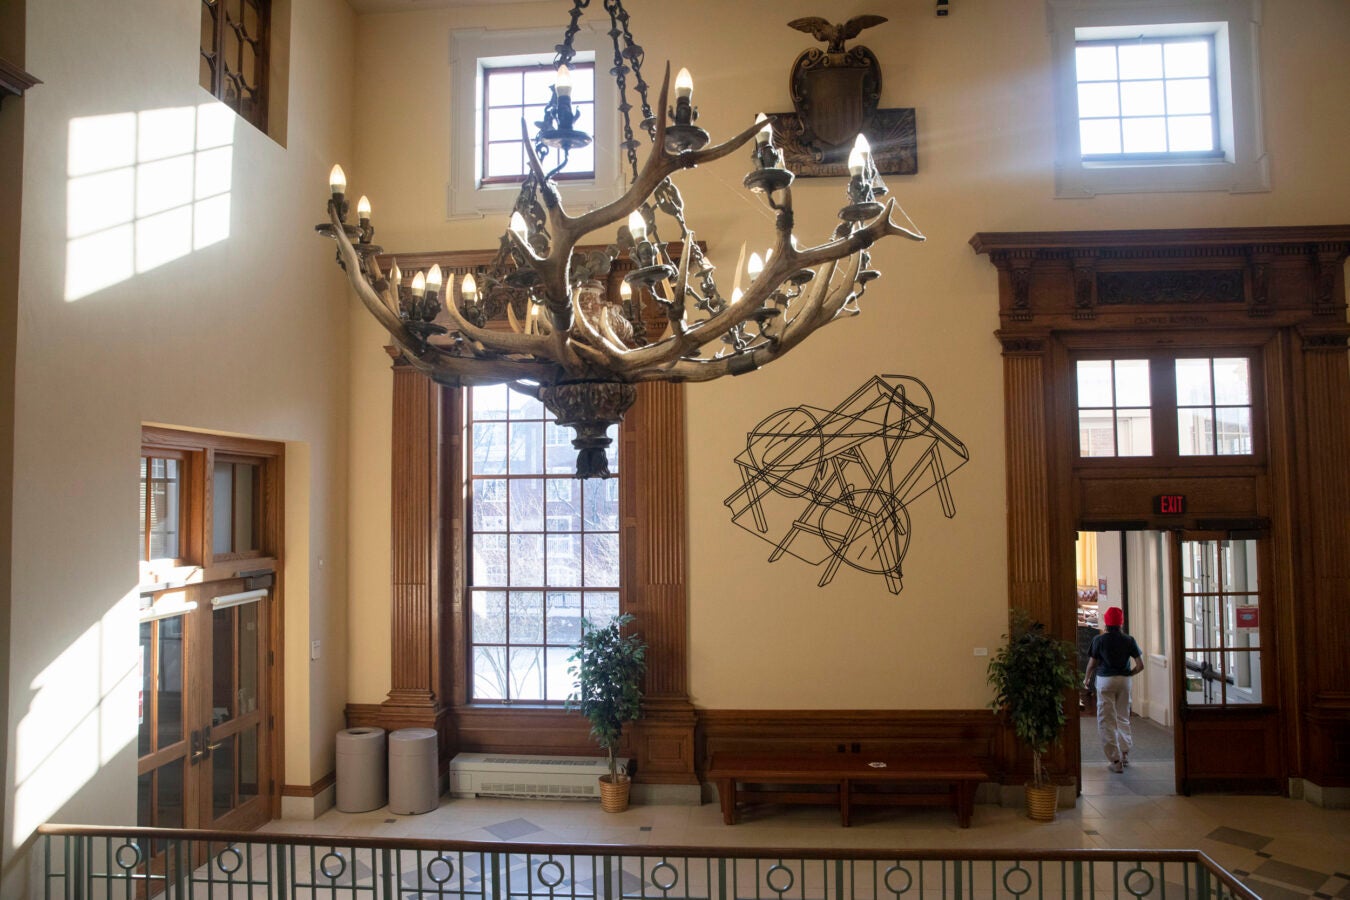 A chandelier hangs in the lobby of the Barker Center.